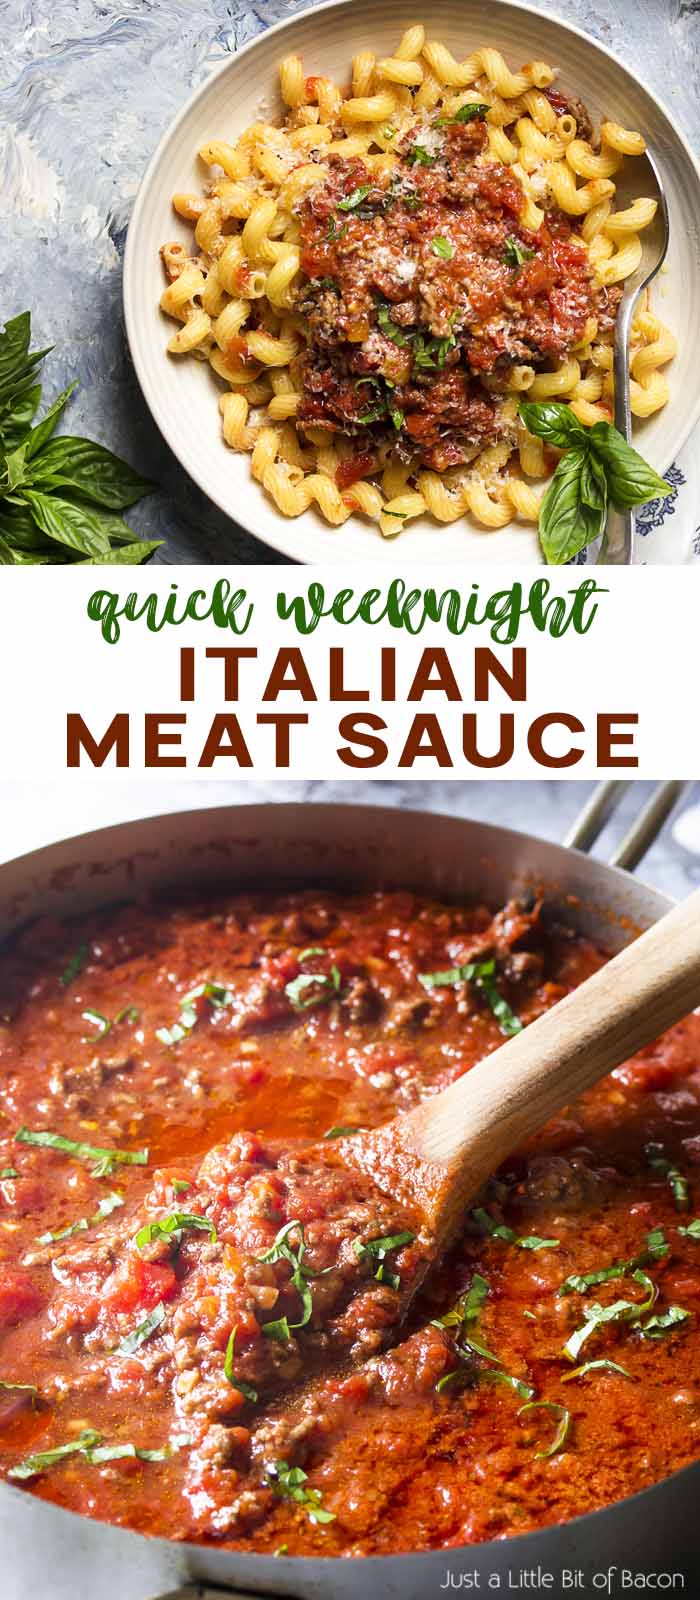 Sauce in the pot and on pasta with text overlay - Italian Meat Sauce.